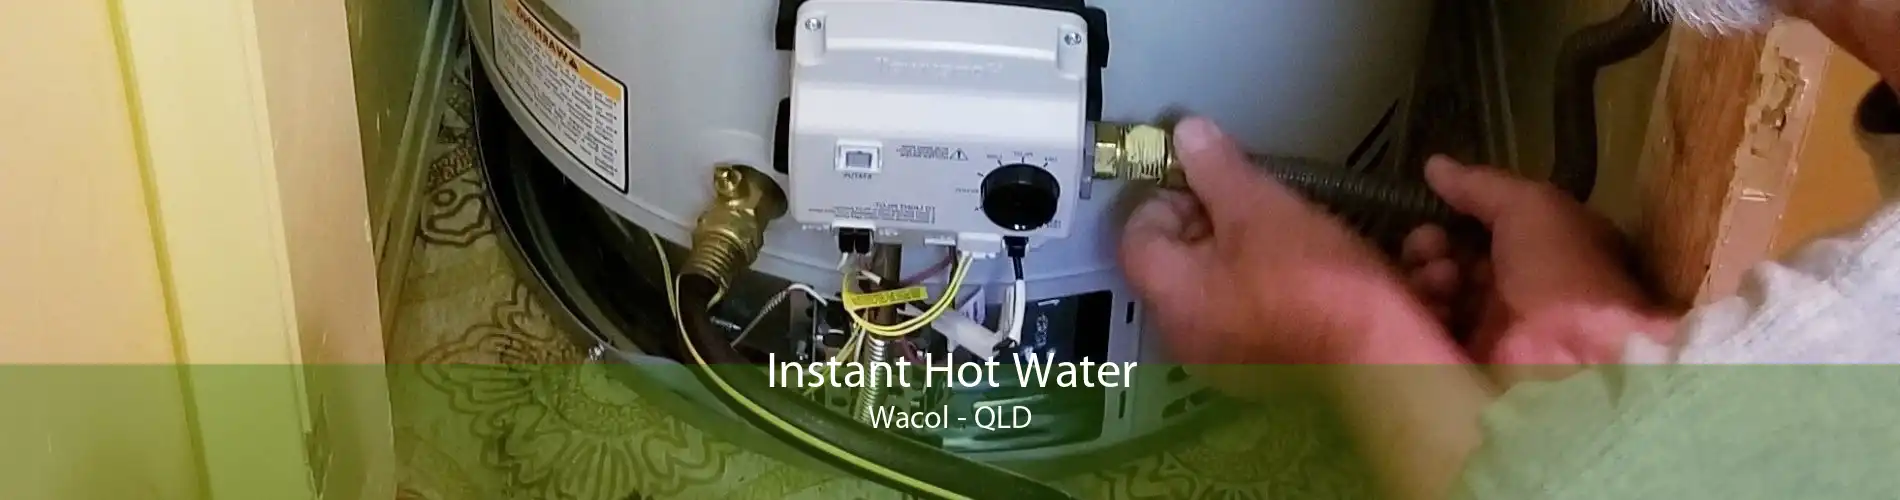 Instant Hot Water Wacol - QLD